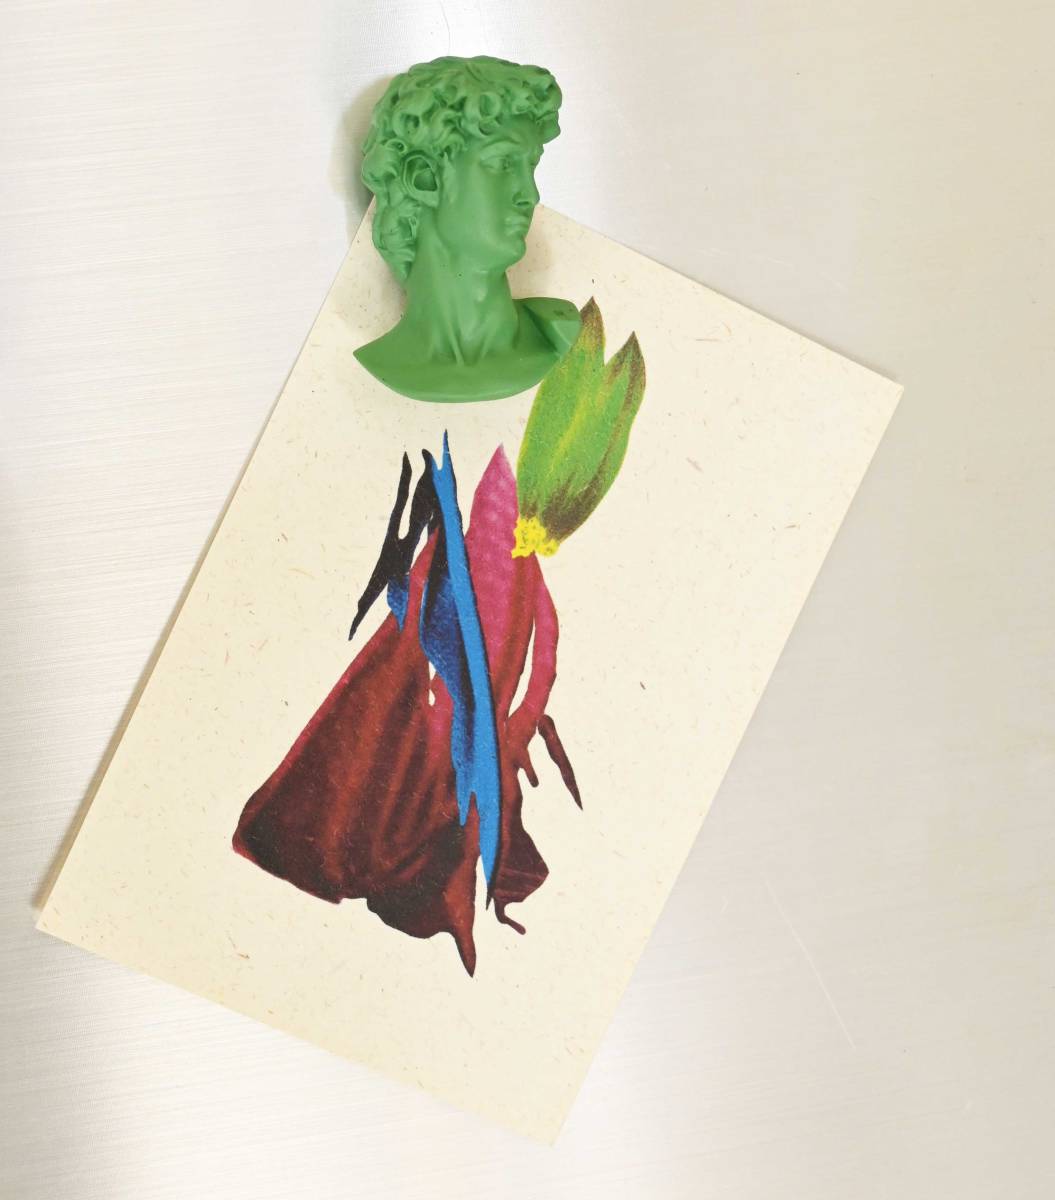  prompt decision / new goods [Statue of David /da bidet image ] resin made magnet / green / red te mia art gallery / America buying attaching / interior / gift (ar-2312-9)